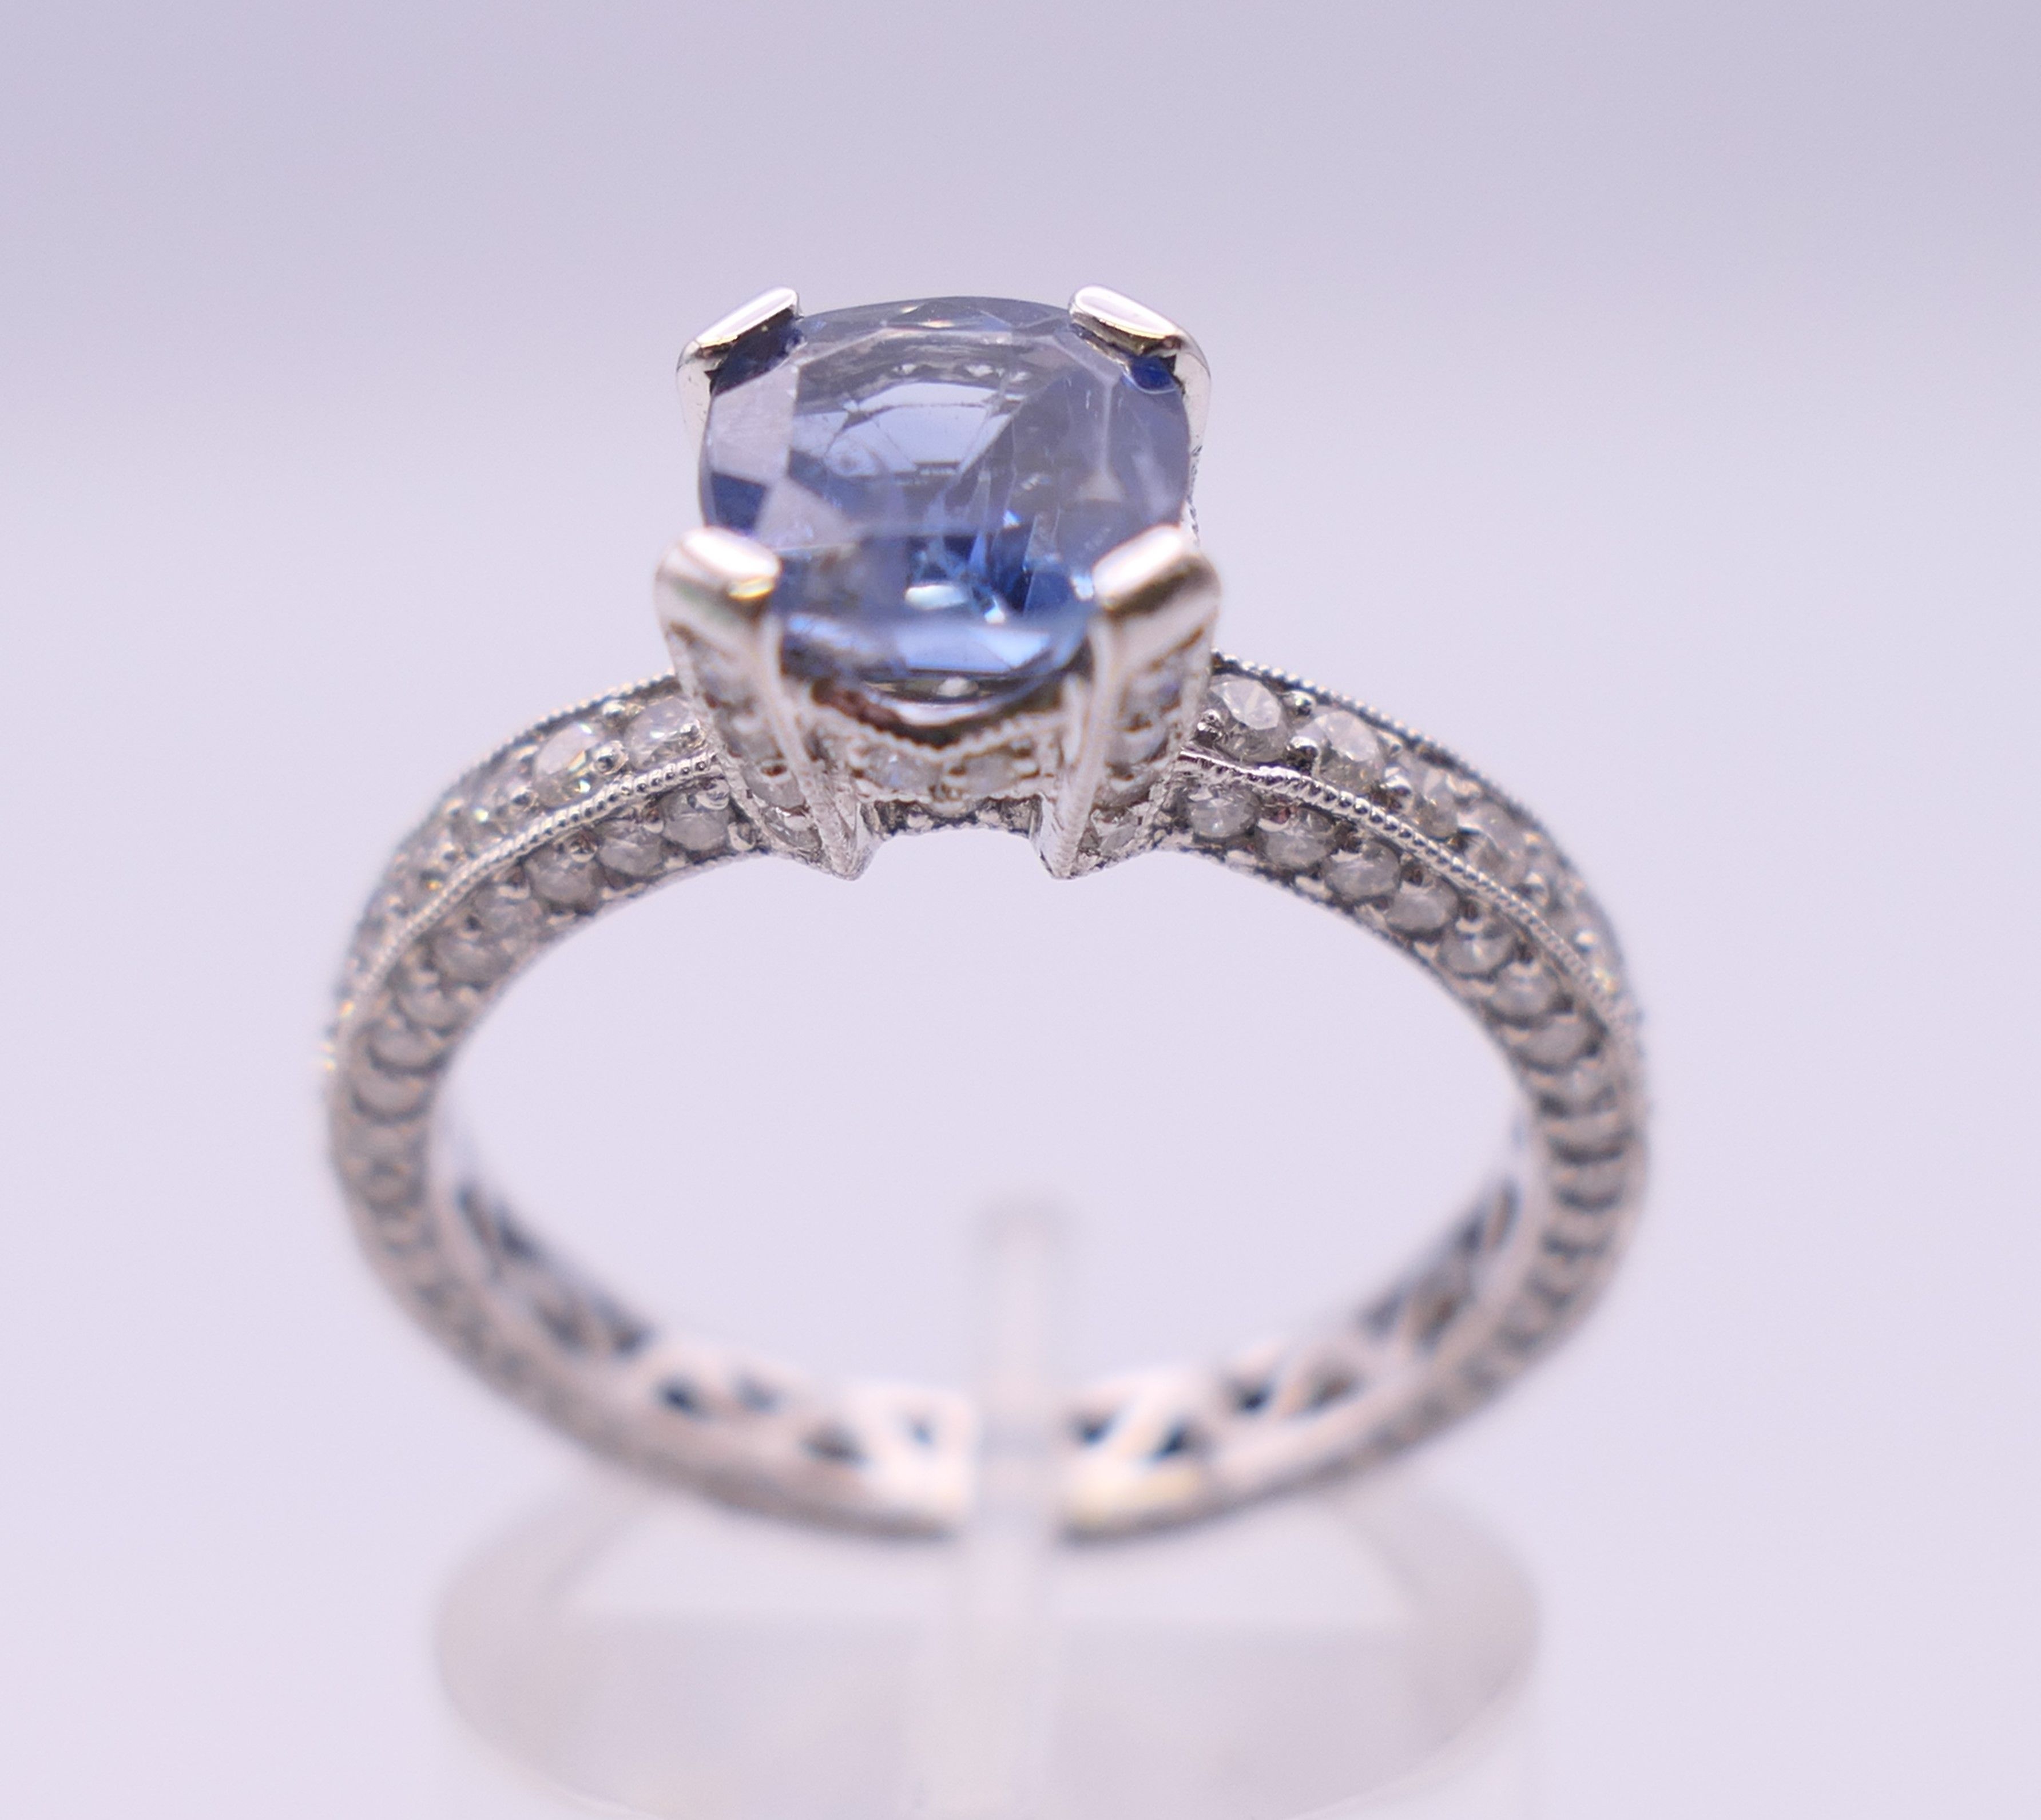 An 18 ct gold sapphire and diamond ring. Total diamond weight approximately 2.5 carats.